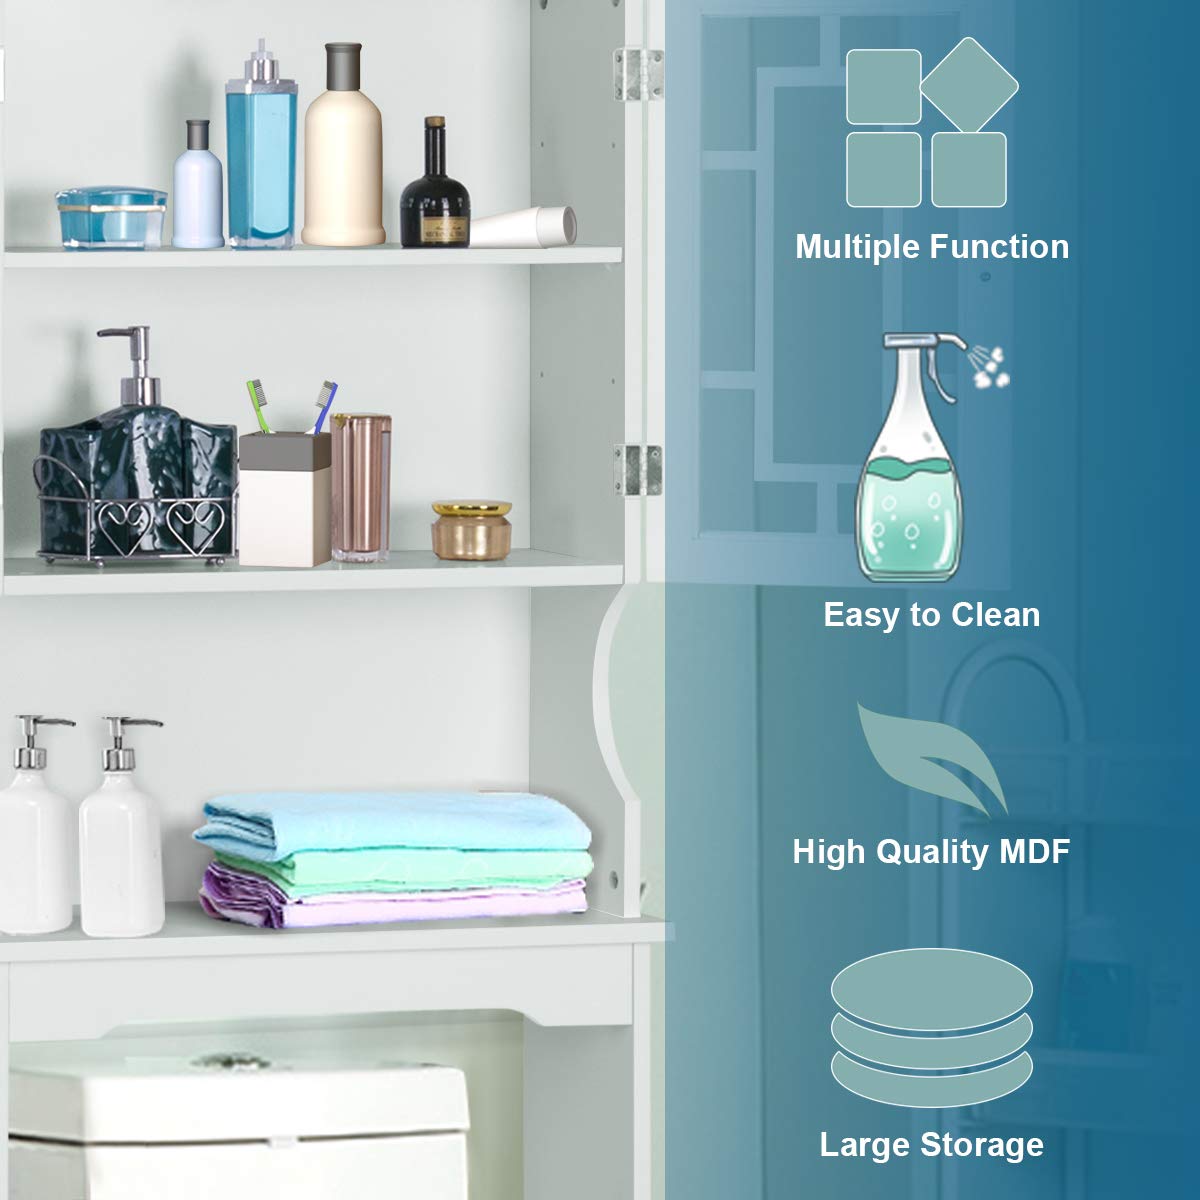 Giantex Over-The-Toilet Storage Spacesaver, Bathroom Organizer with Cabinet and Shelf